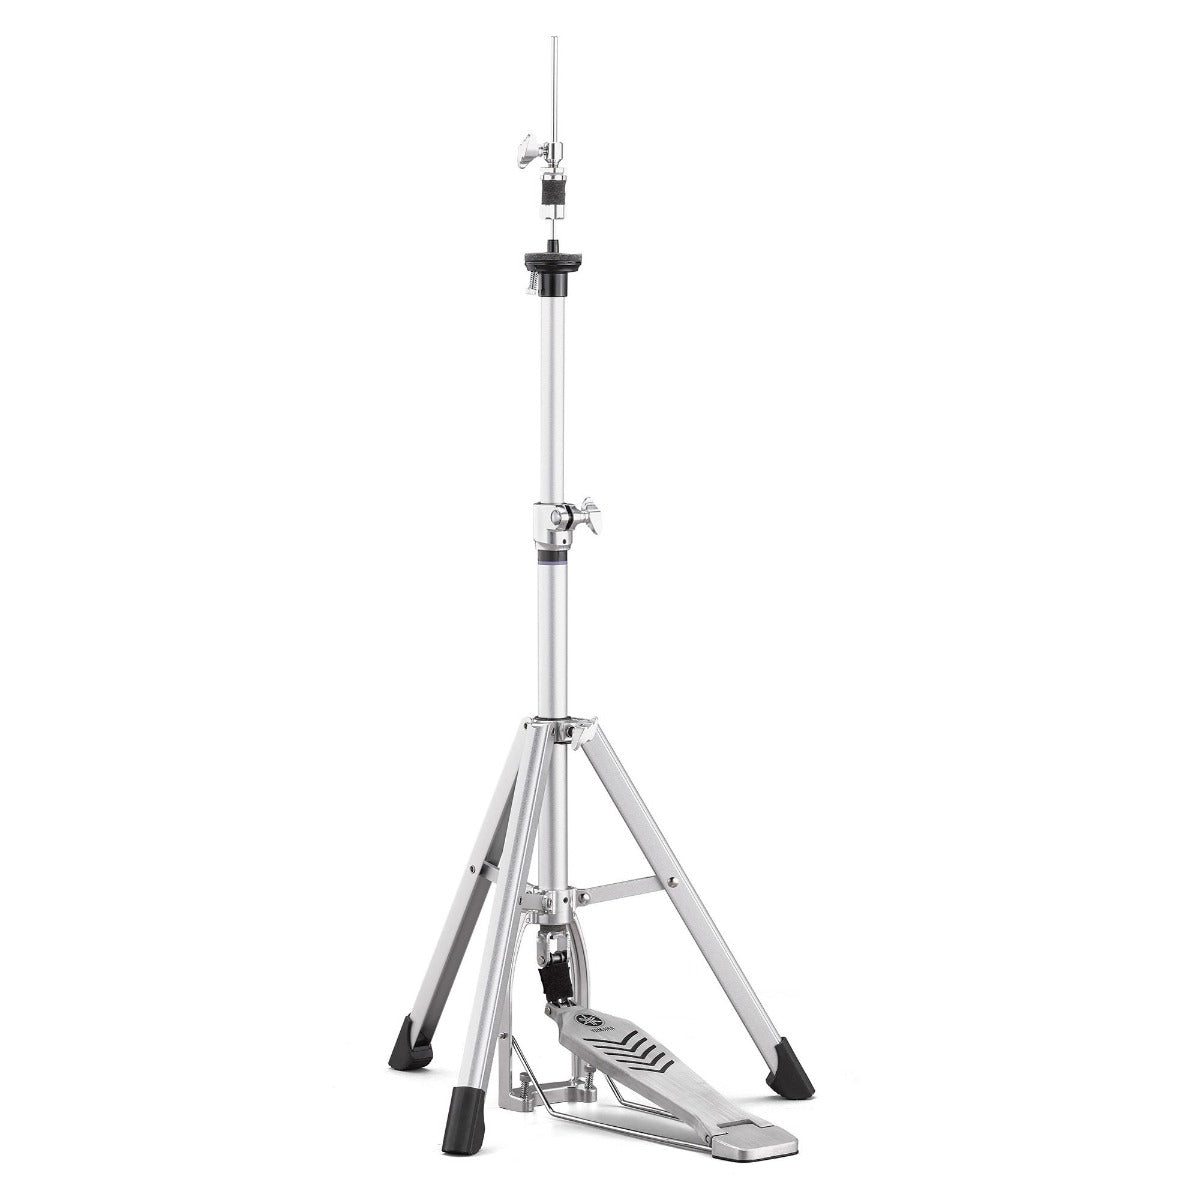 Yamaha CrossTown HHS3 Hi-Hat Stand